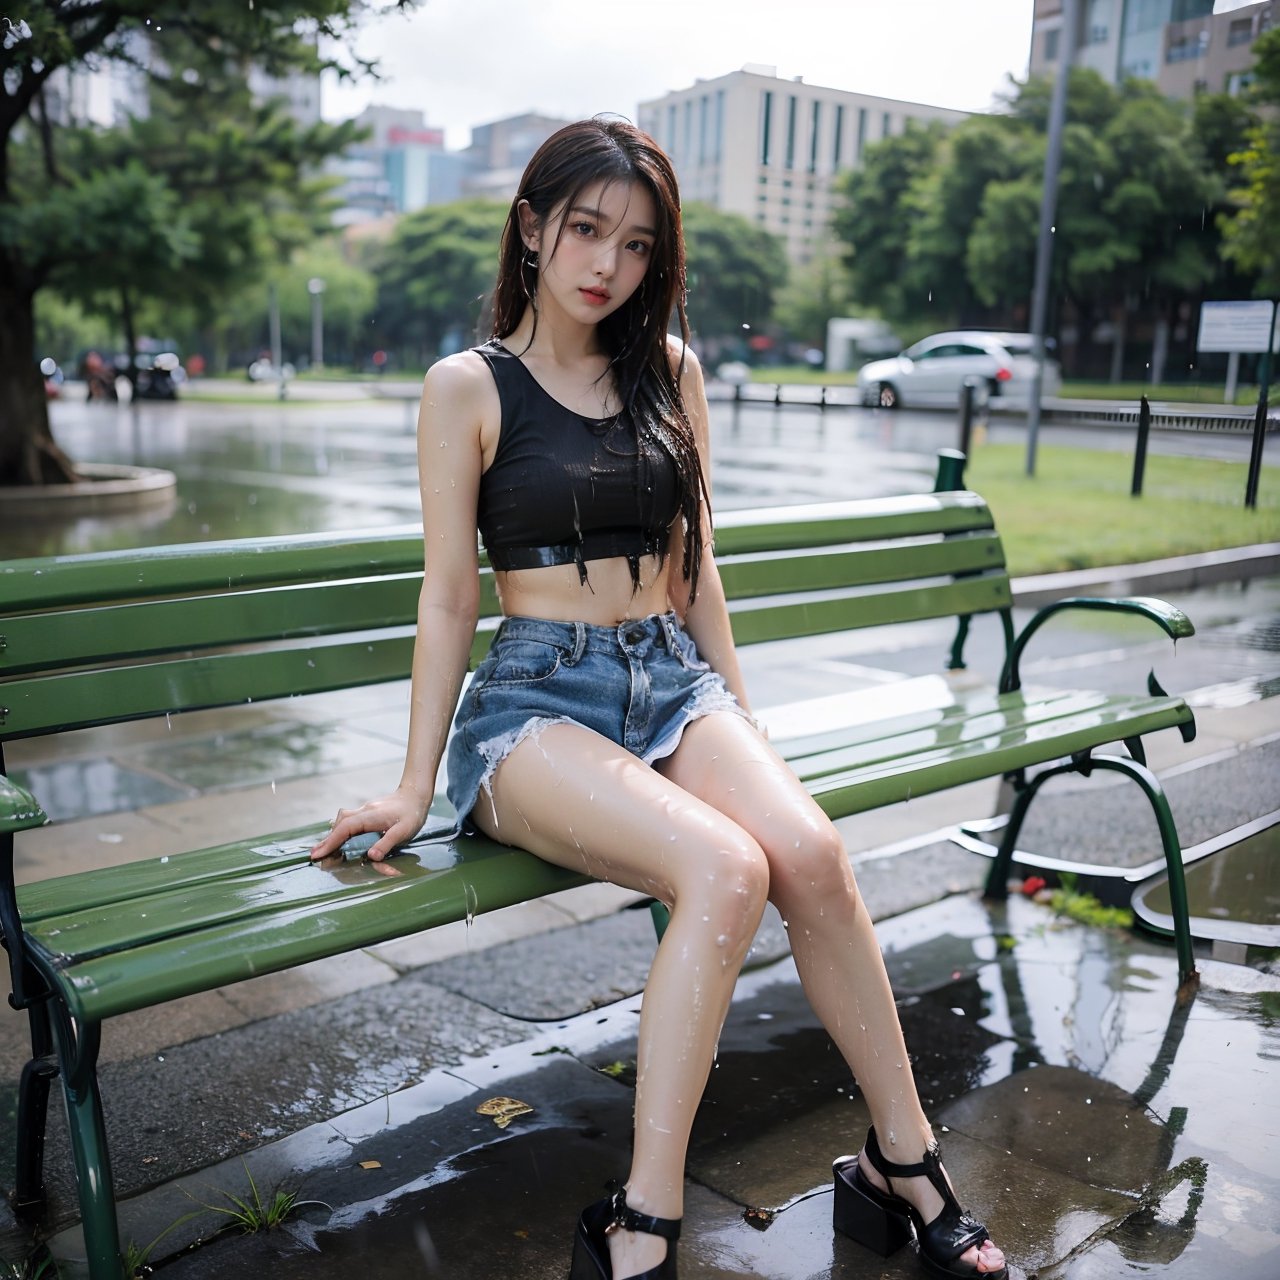 Young_american_women, ((wet_clothing)), (wearing crop top and mini skirt) hourglass_figure, sexy, seductive_pose, sultry, full_body, standing in the rain park, perfect lighting, ((sitting_down on a bench))